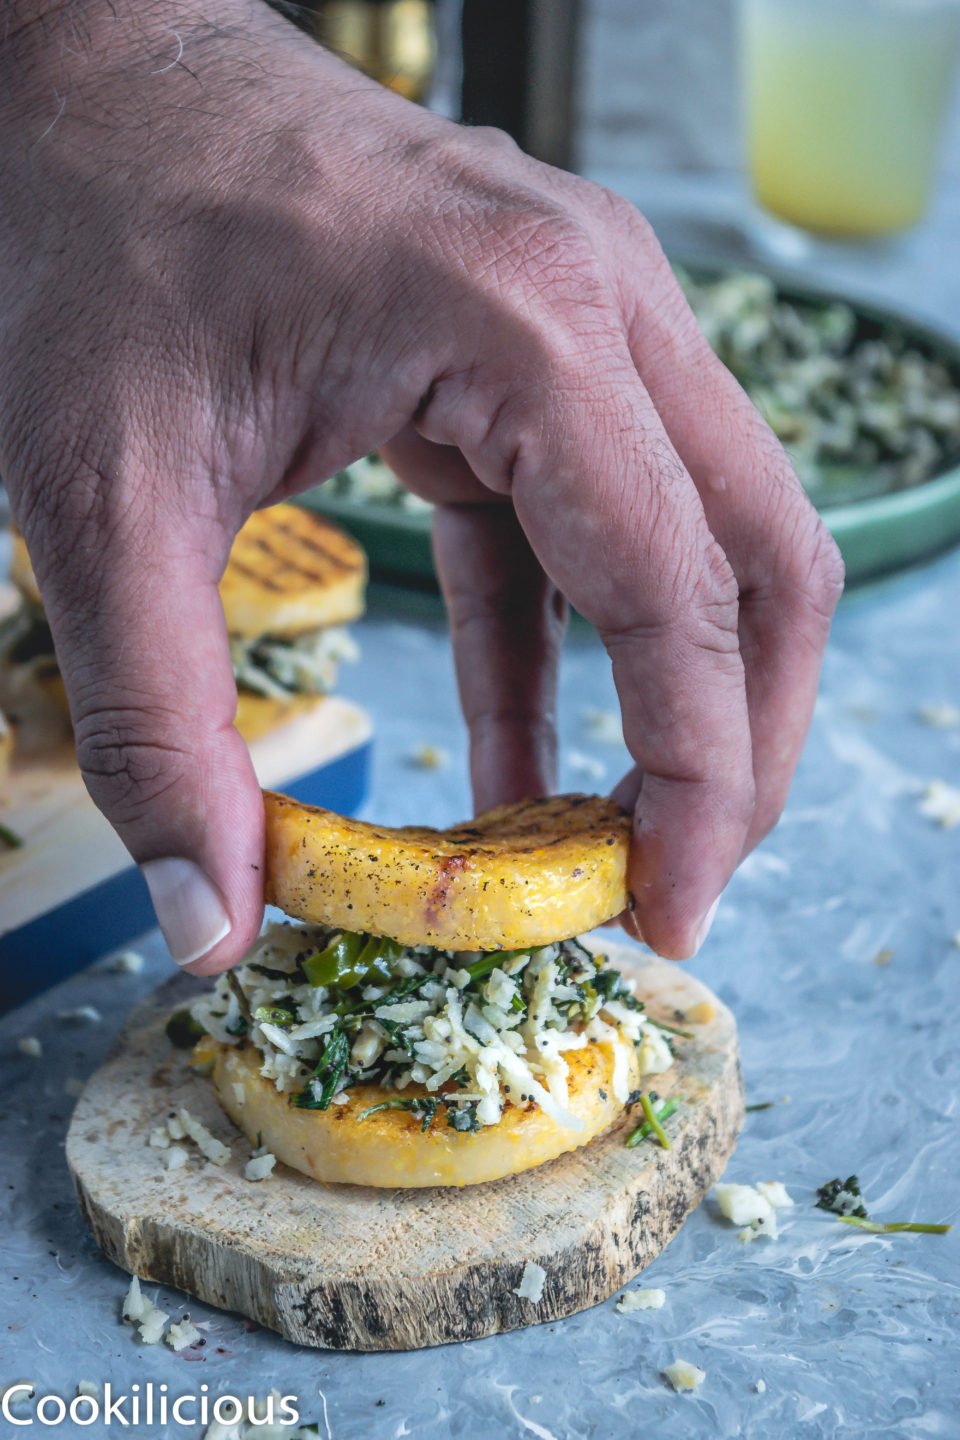 a hand placing a grilled polenta over the prepared cilantro masala, like a sandwich makes a great vegan gluten free recipes